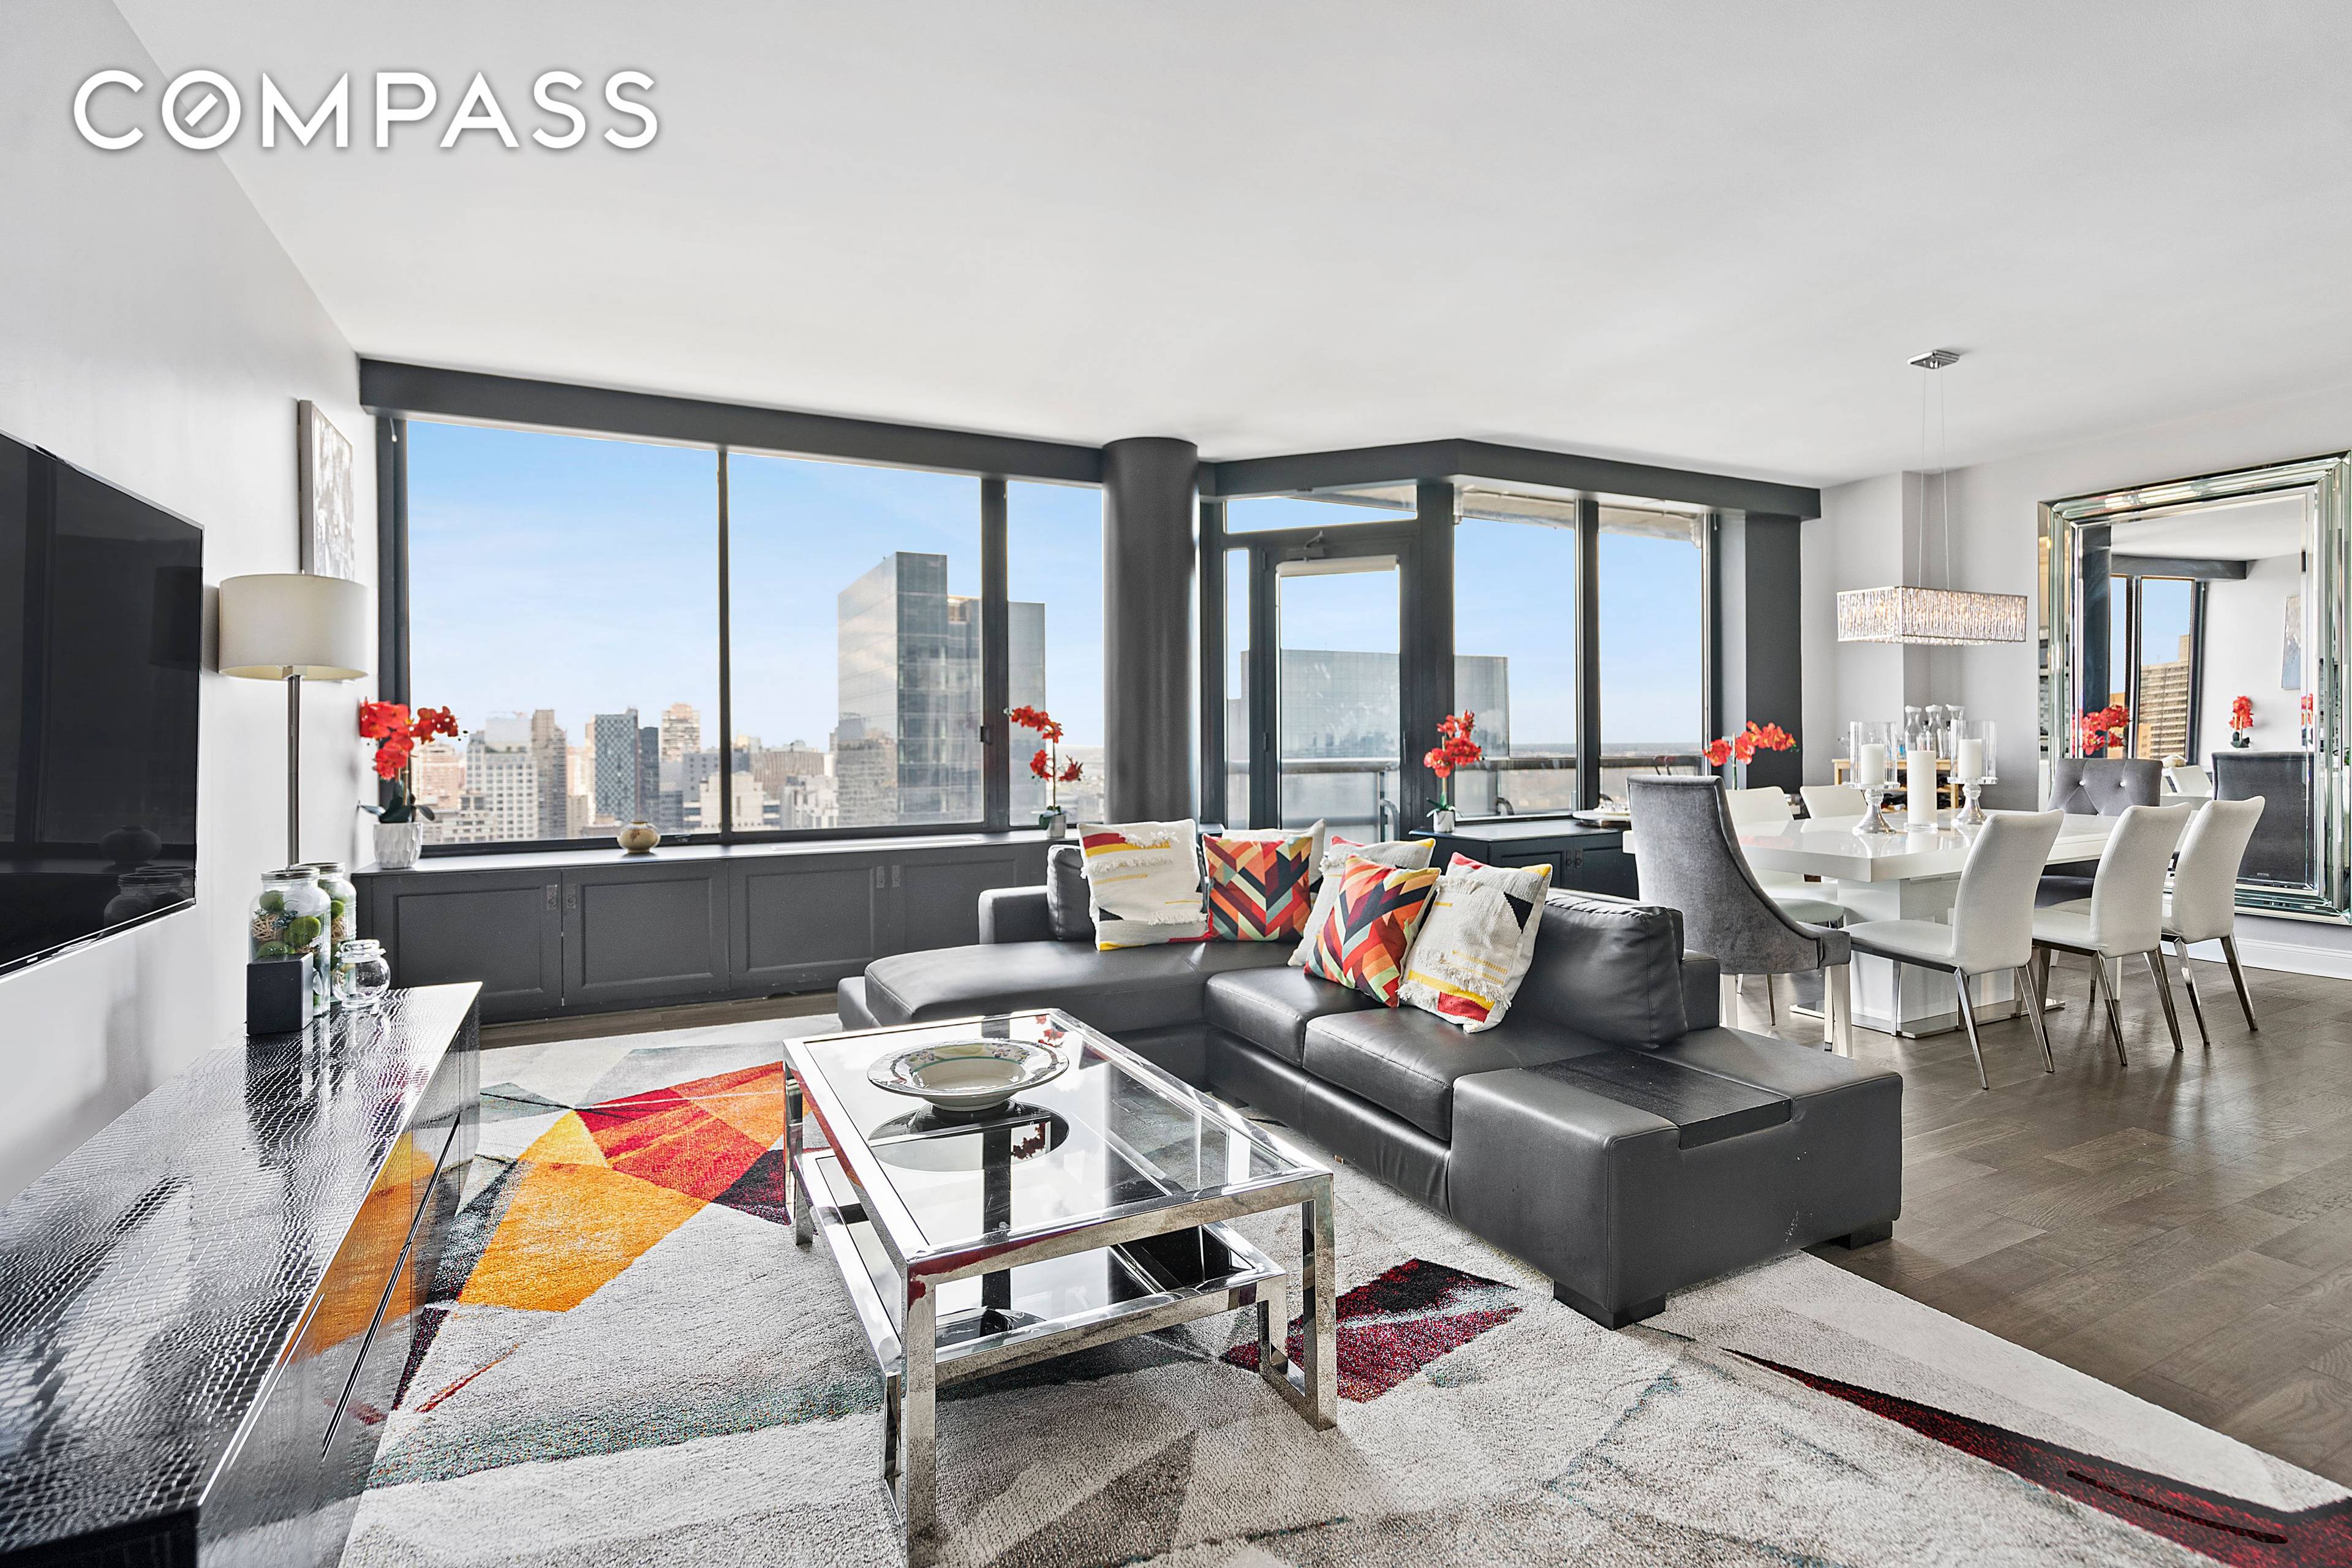 Located in the sky at the Grand Sutton's 35th floor, you are immediately taken by the dramatic views over the City as well as the East River.